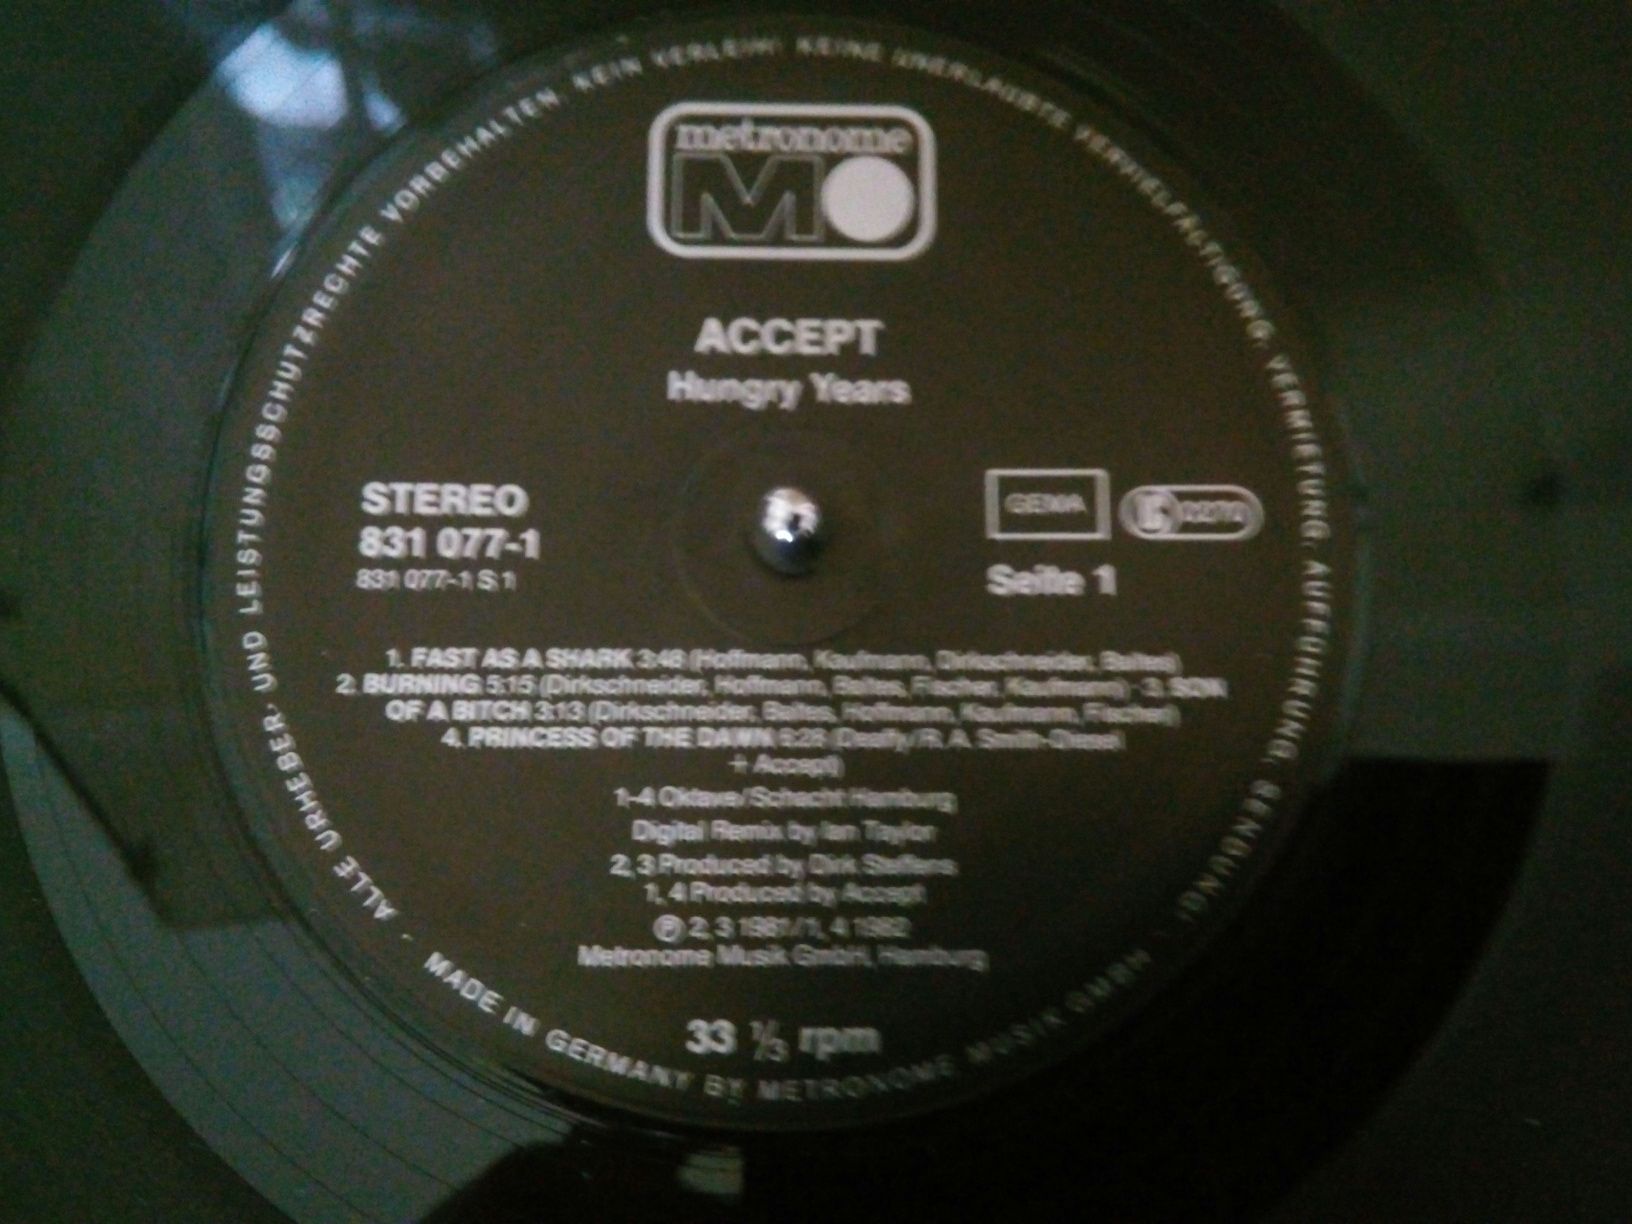 Accept - " Hungry Years " ... Lp em vinil